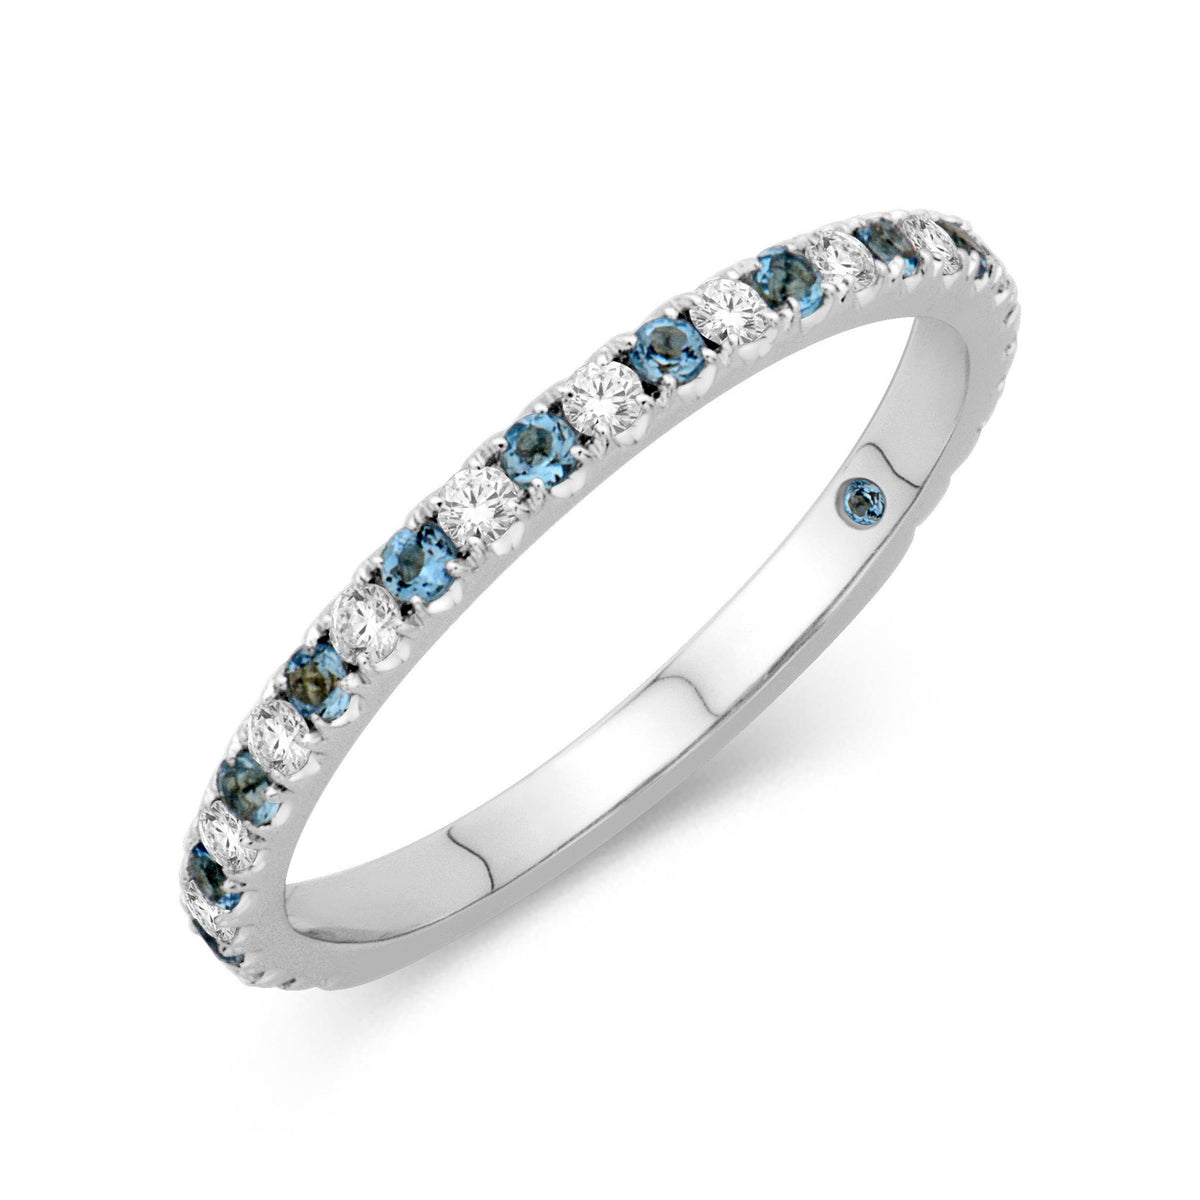 14Kt White Gold Stackable Gemstone Ring With Diamonds and Blue Topaz